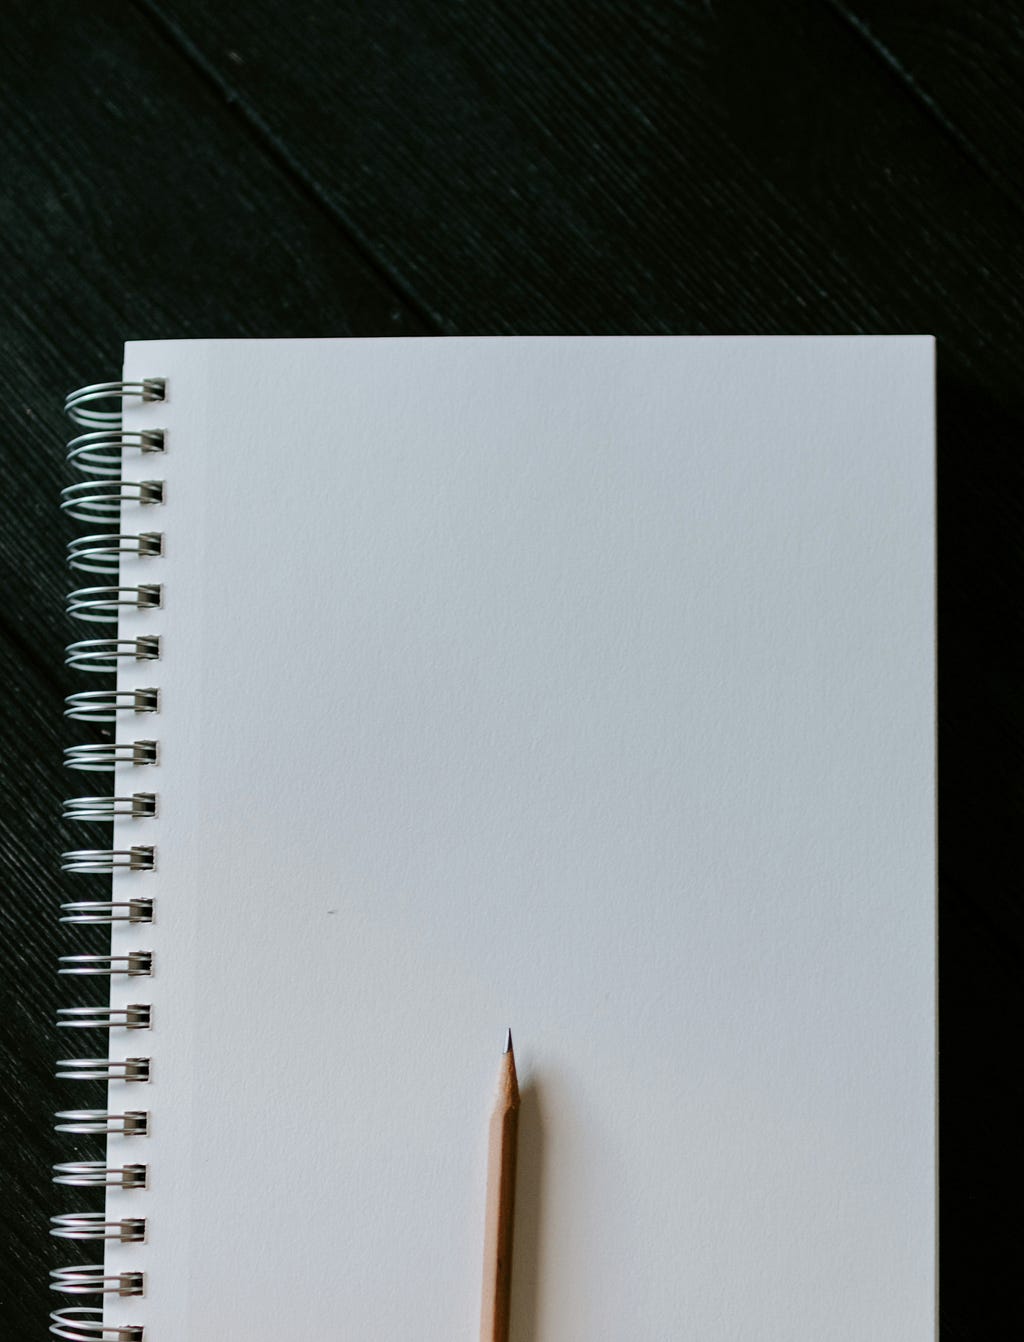 The titular blank page with a pencil waiting to be used.